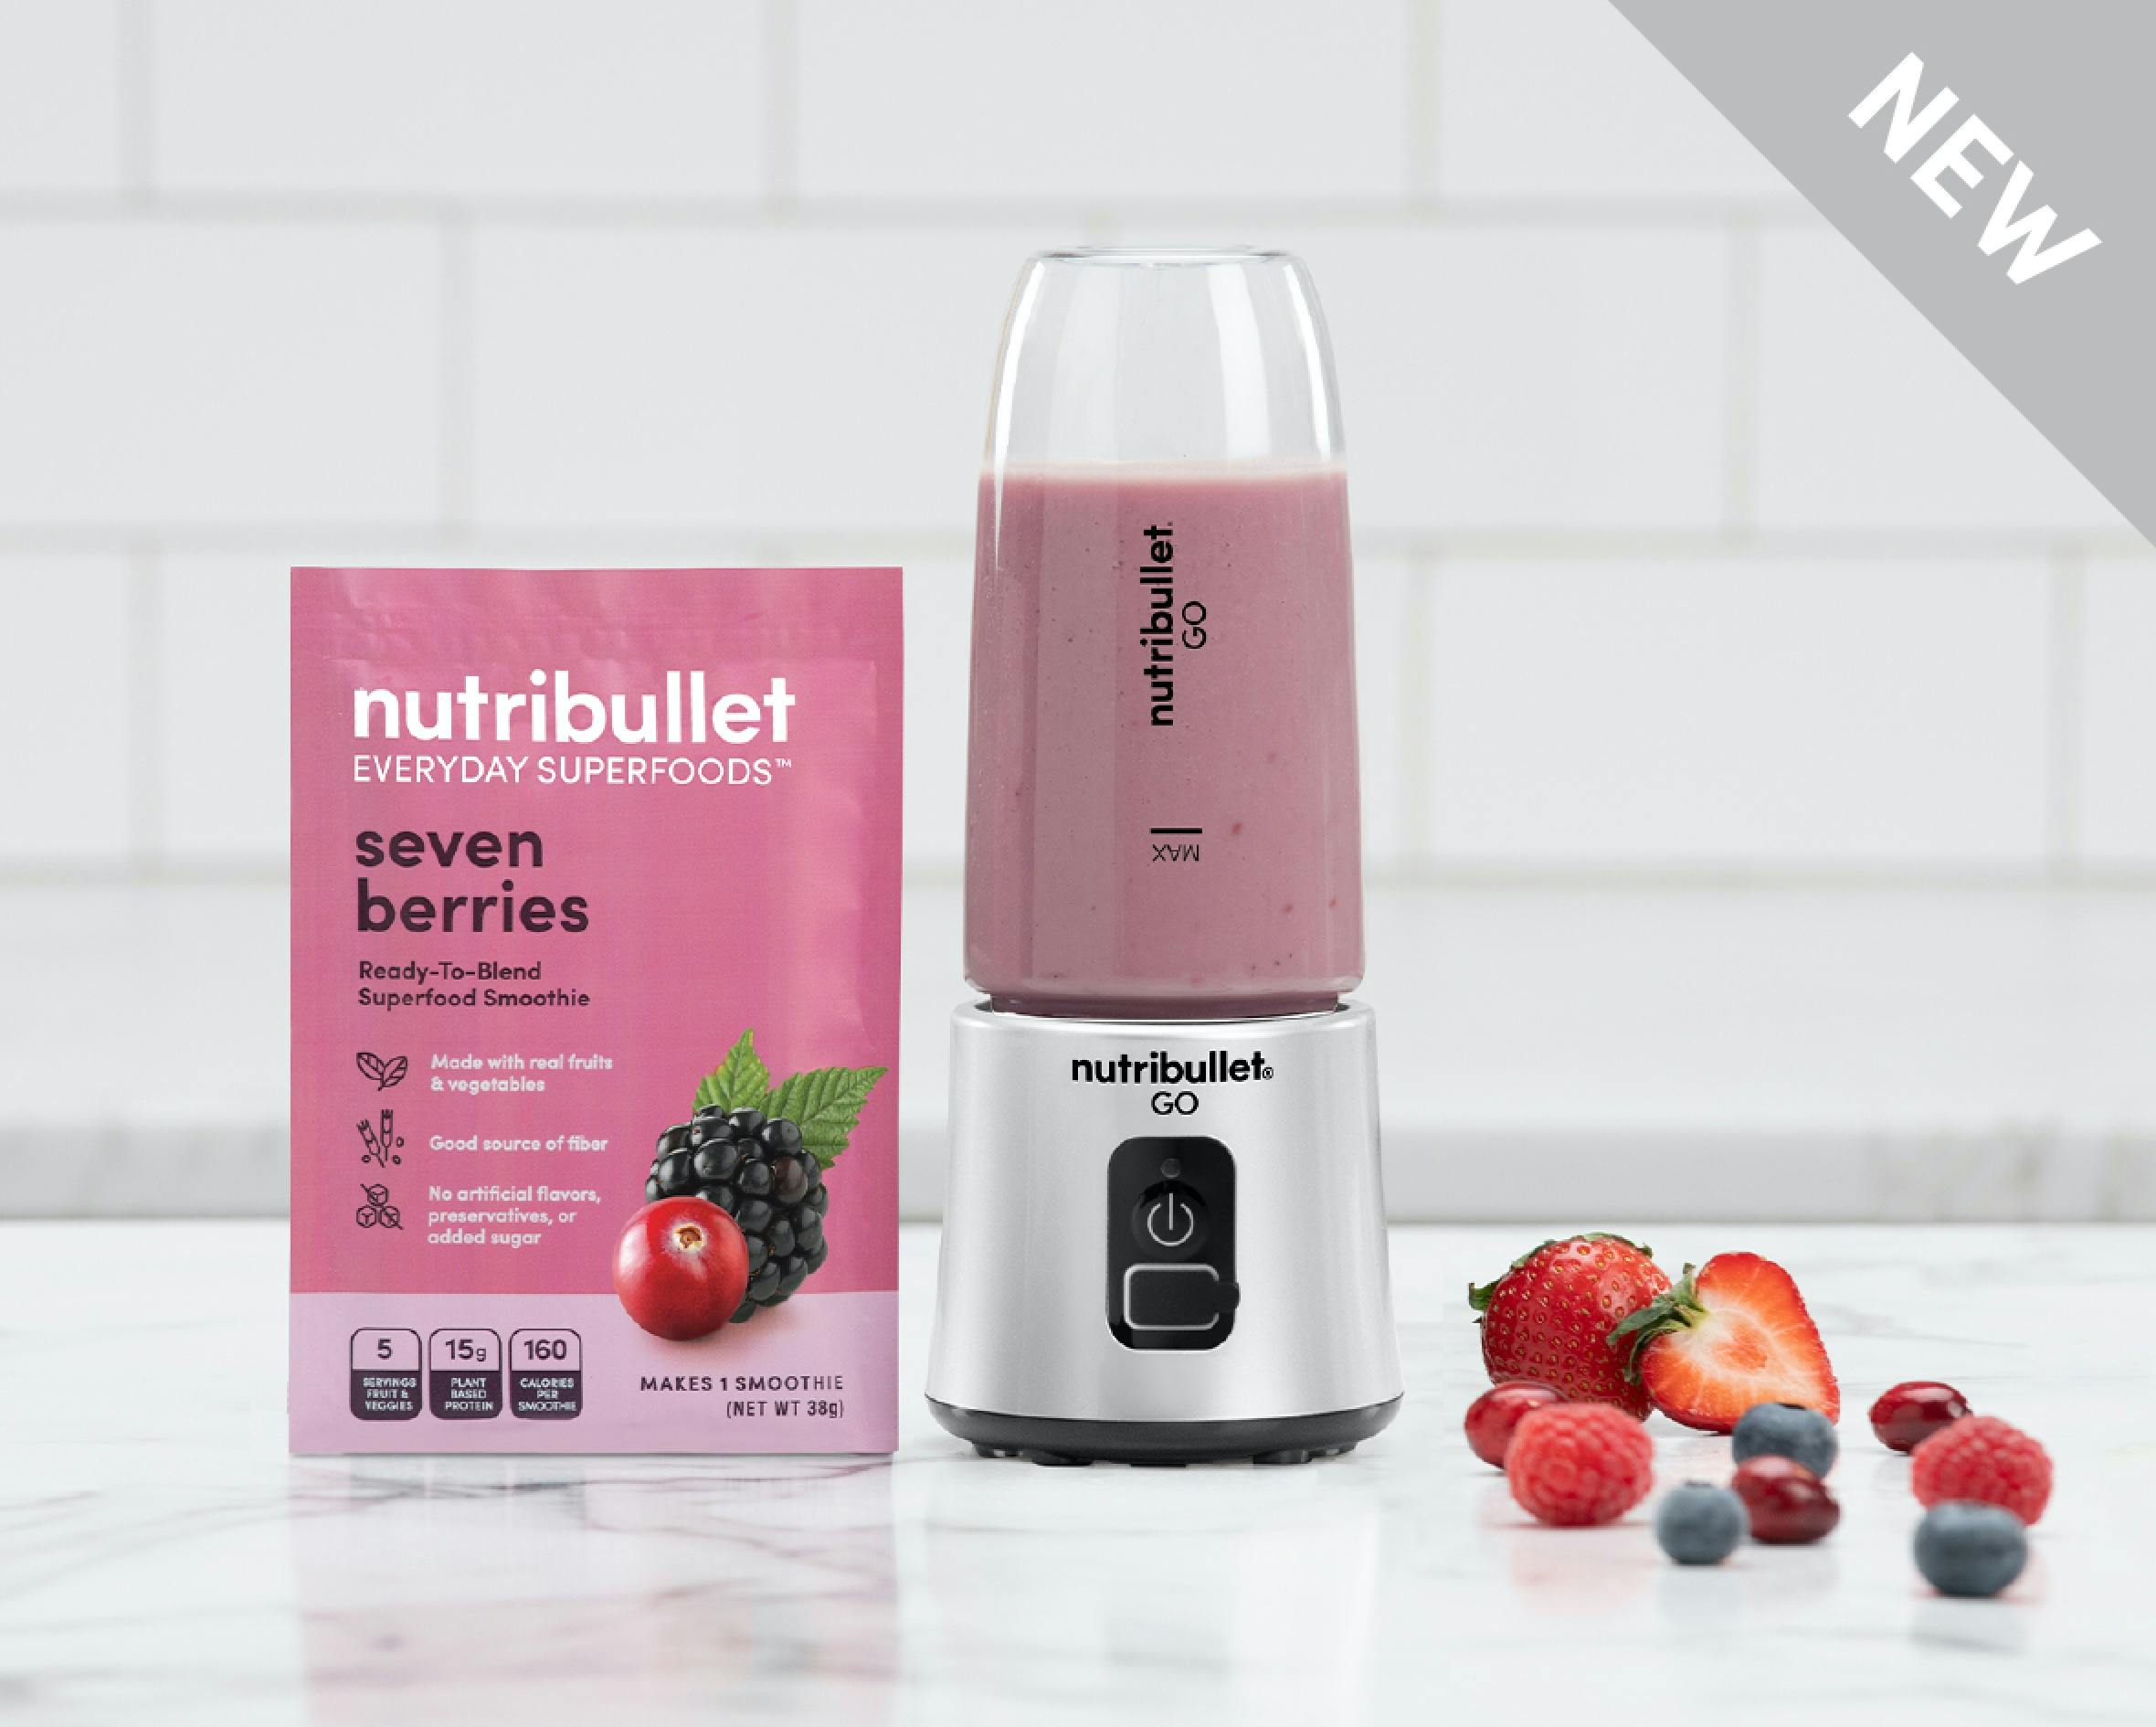 Getting ready for a Friday night get-together? The NutriBullet